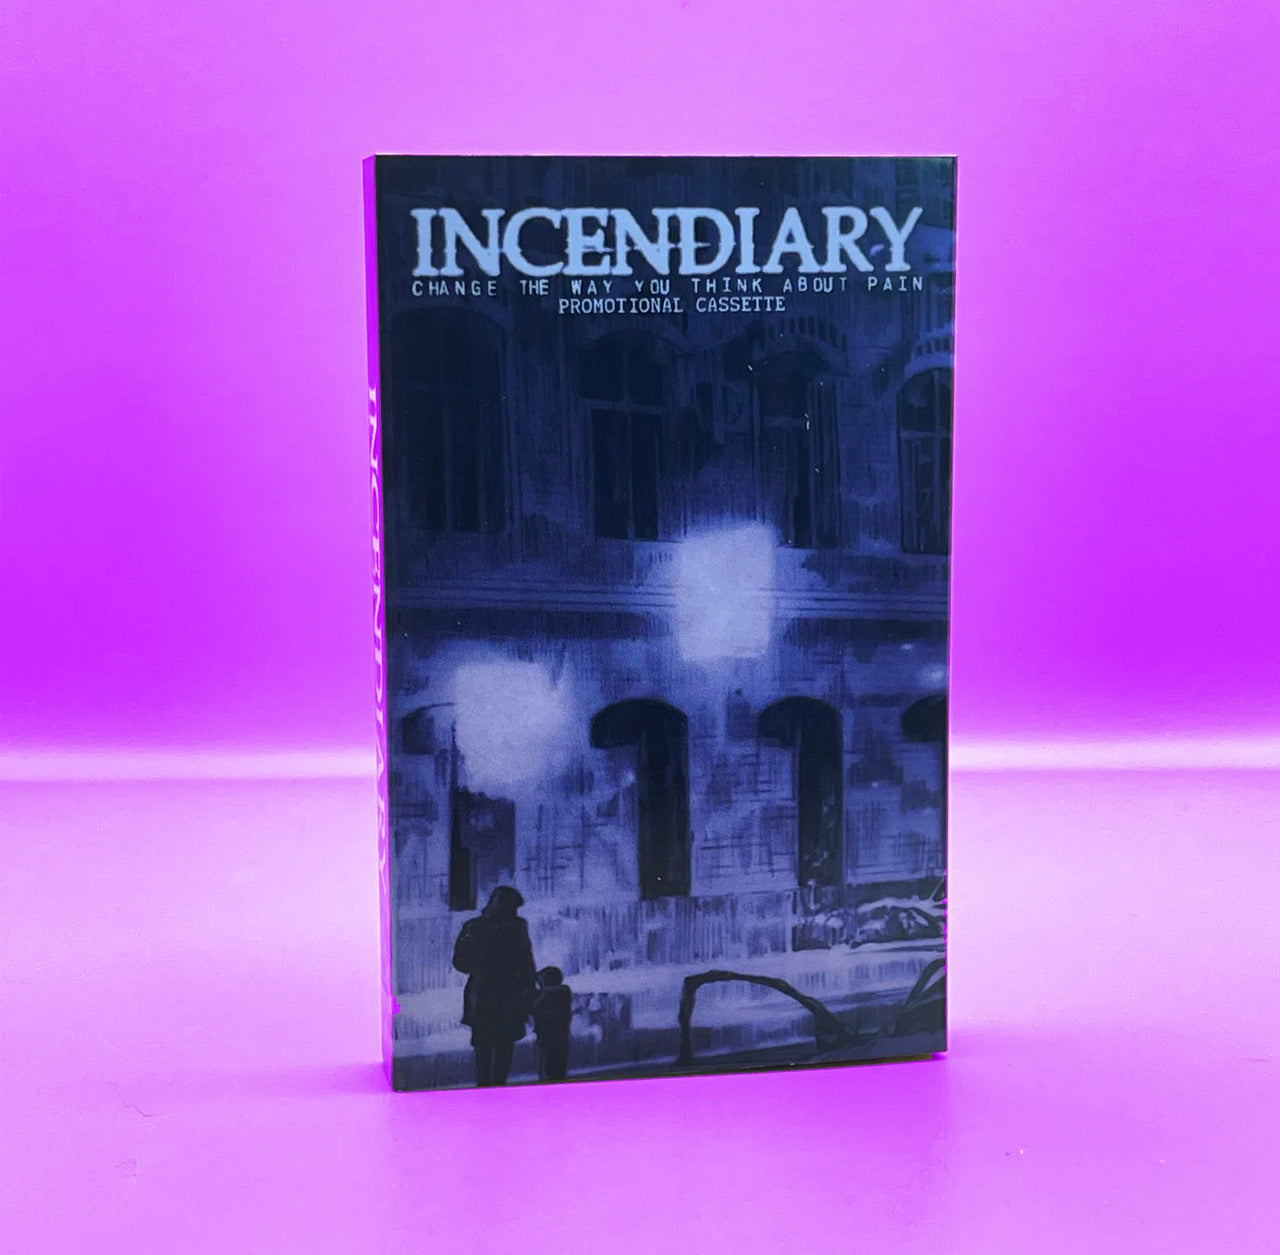 Incendiary "3 Song Promo" Cassette